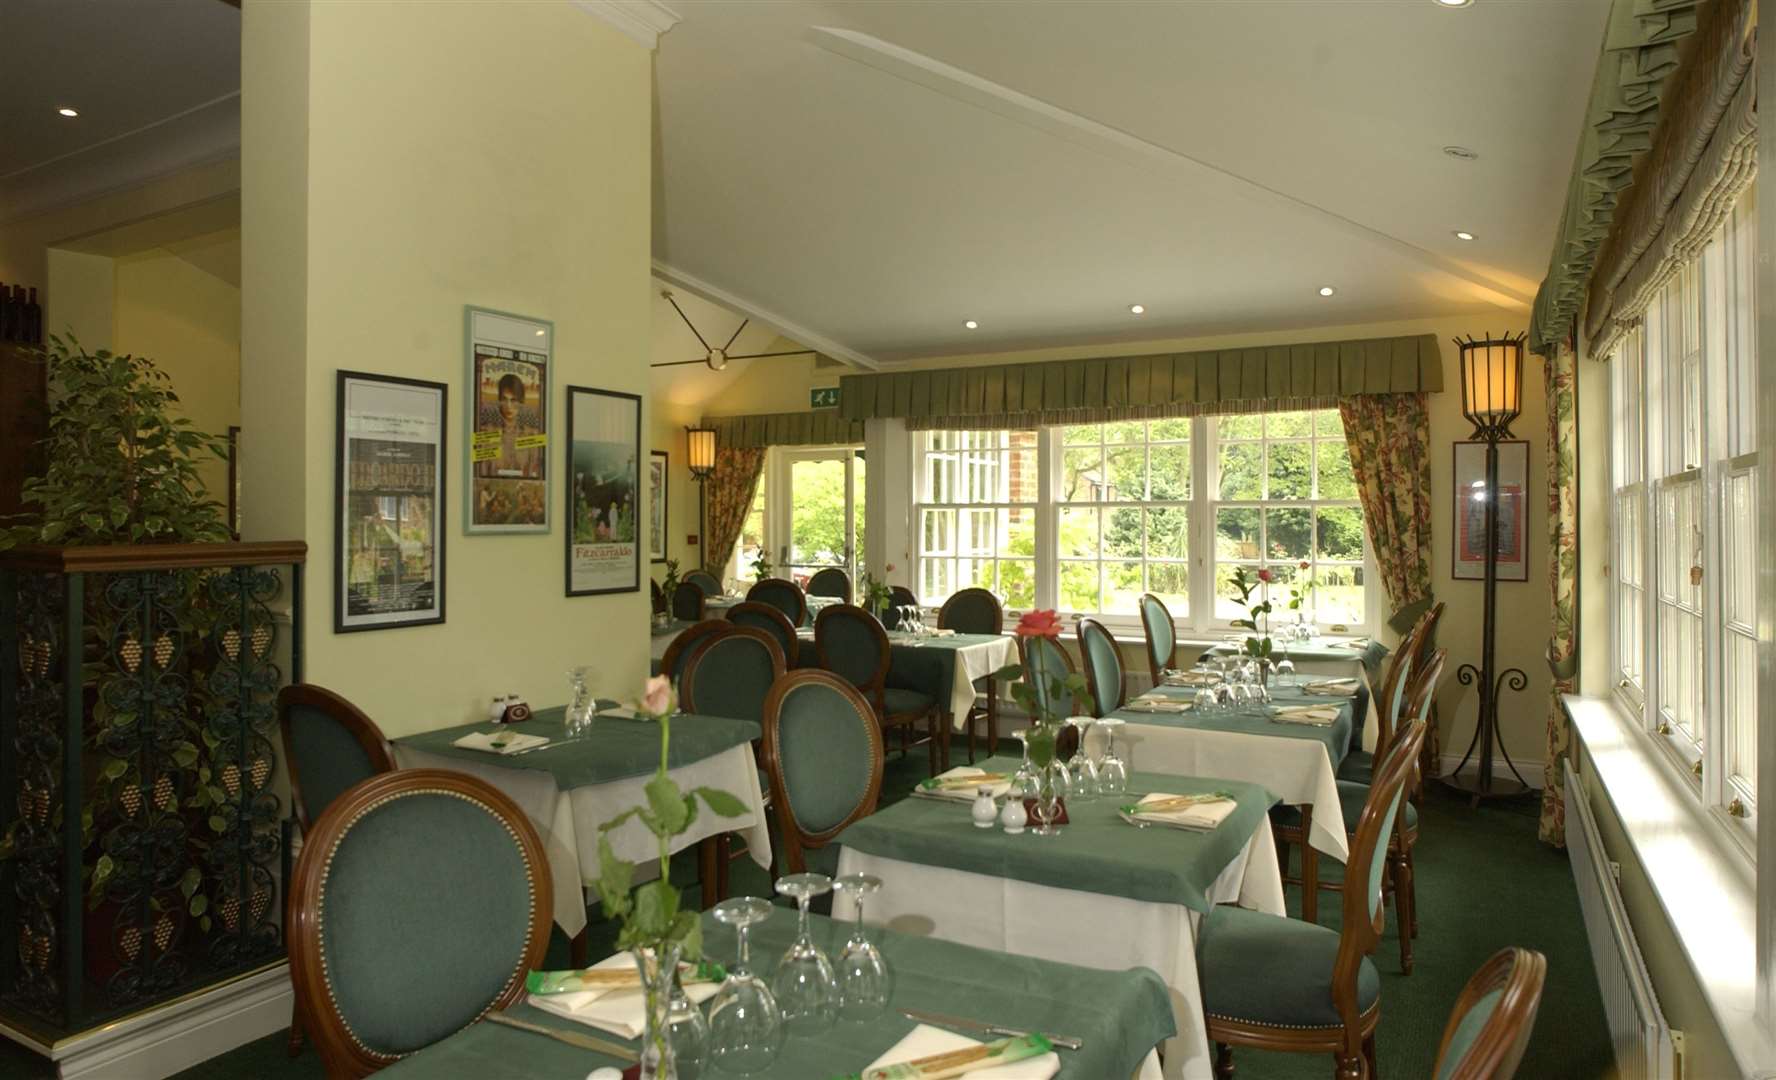 The former dining room in 2003